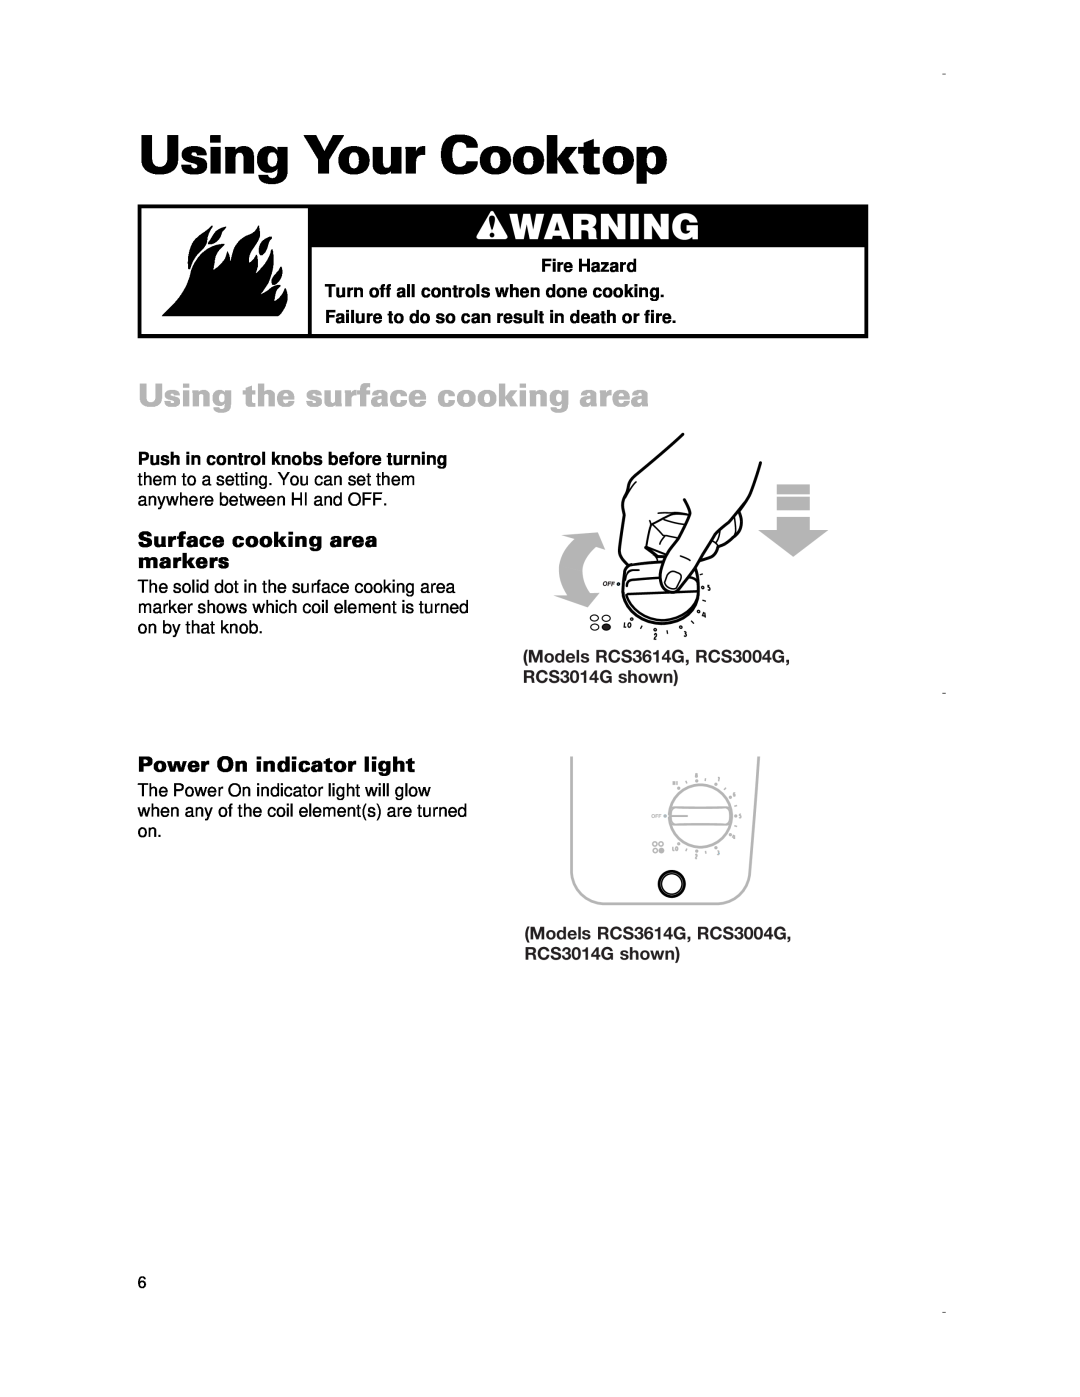 Whirlpool RCS2012G, RCS3614G Using Your Cooktop, wWARNING, Using the surface cooking area, Surface cooking area markers 